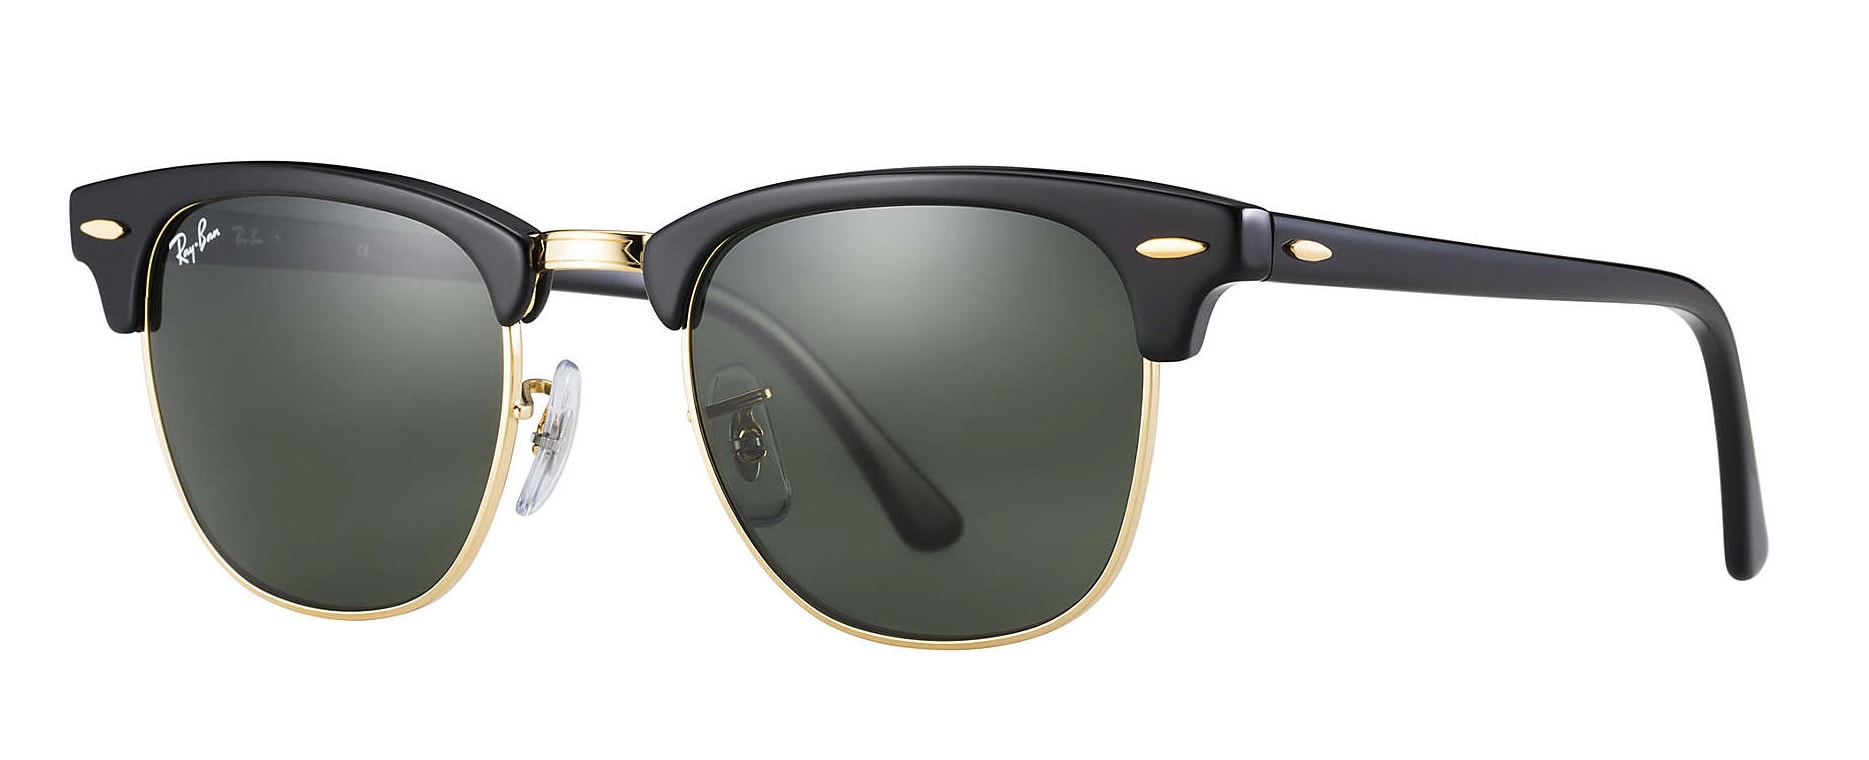 Ray-Ban Clubmaster Classic Black on Gold Sunglasses RB3016 W0365 51-21